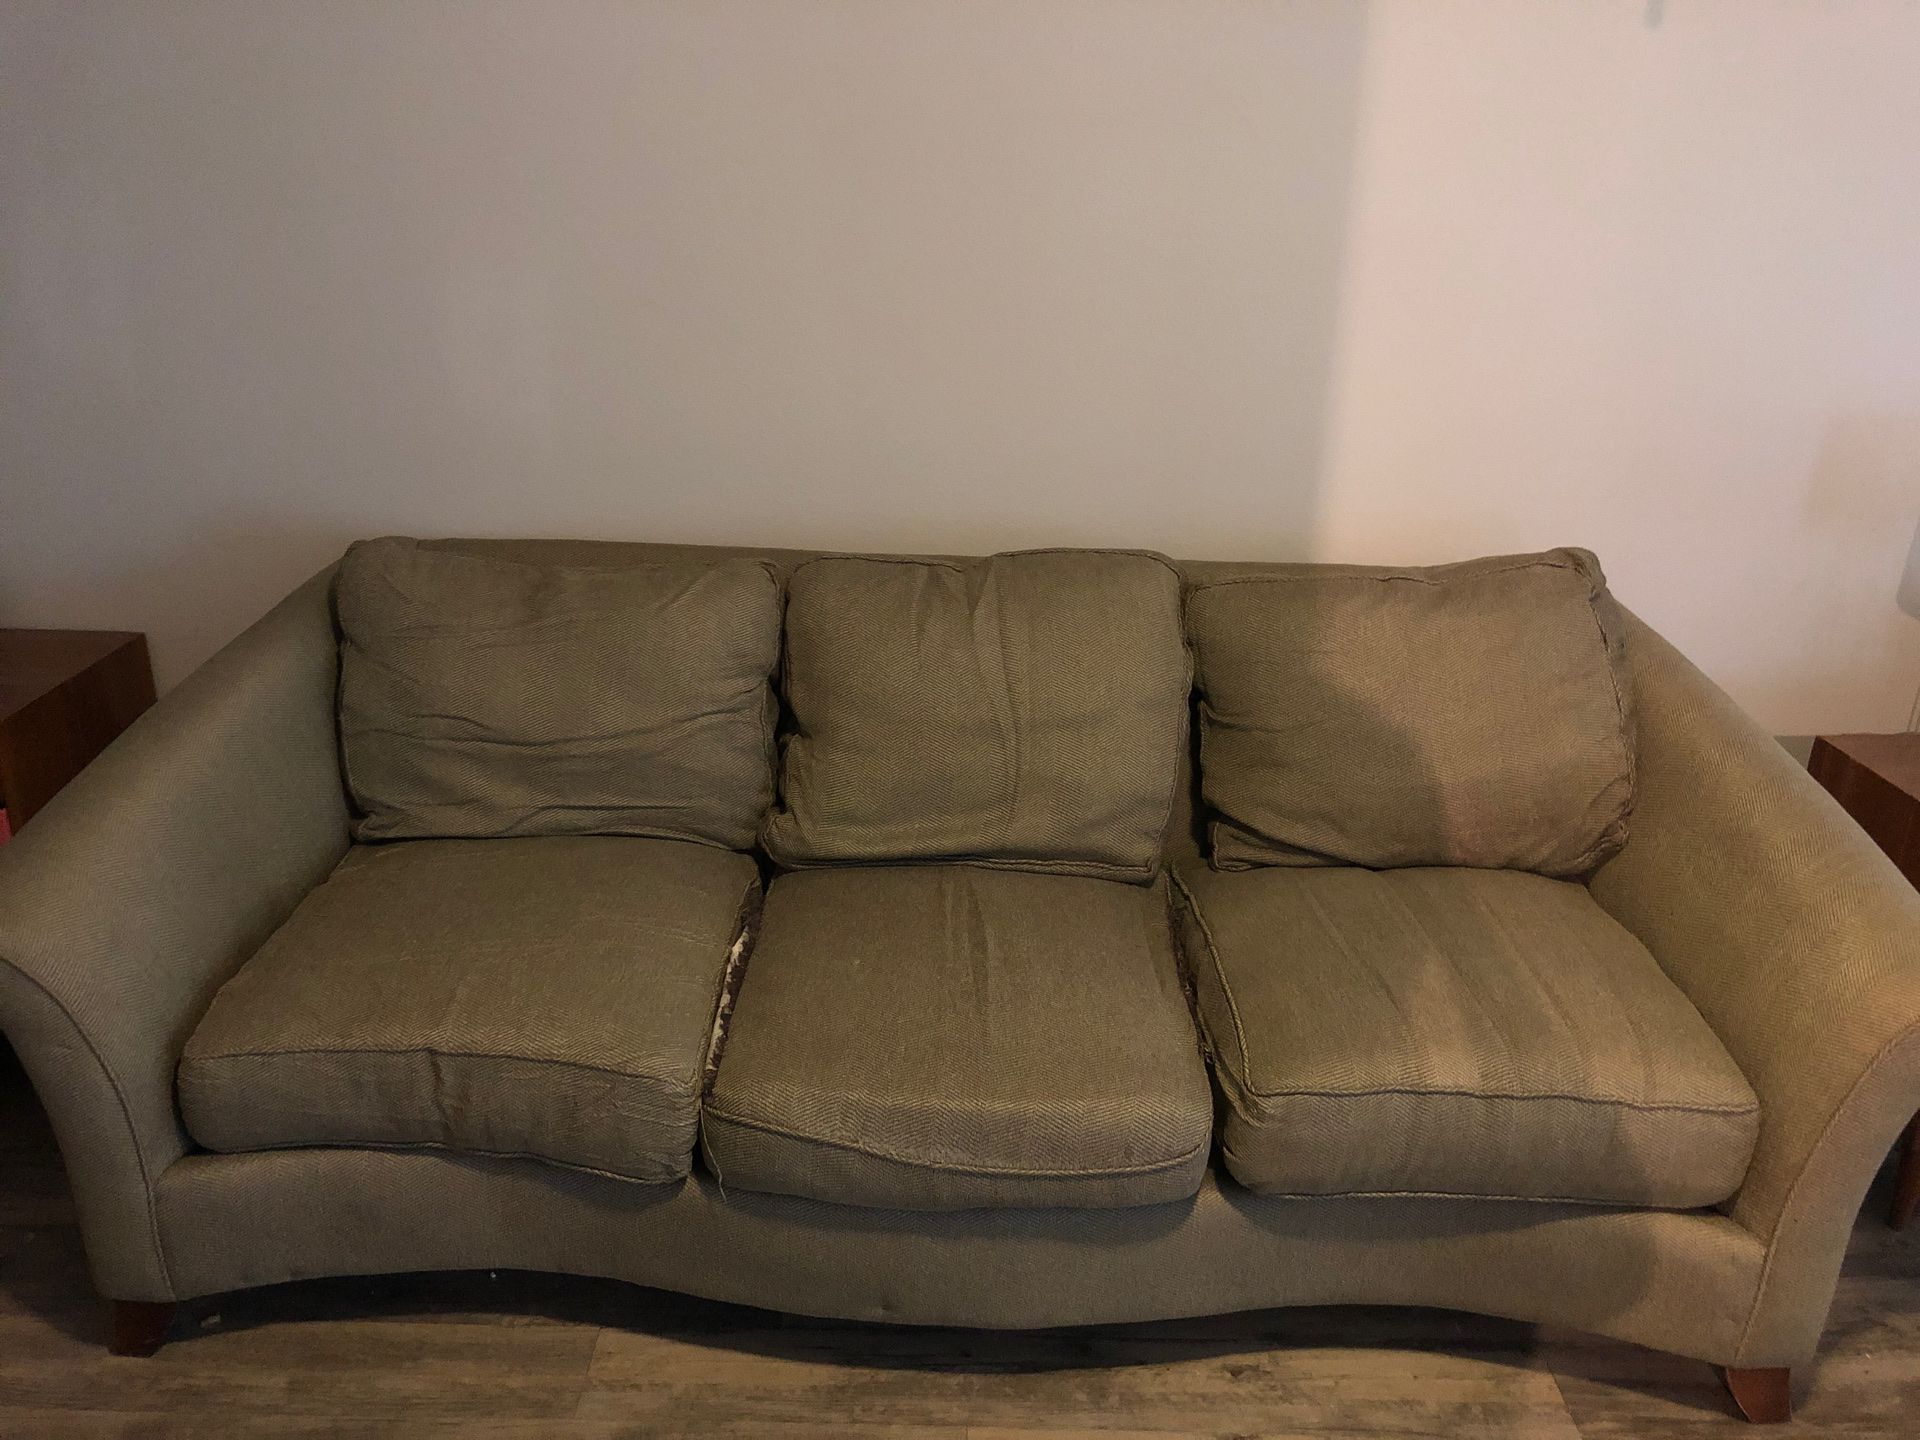 Free, very used couch